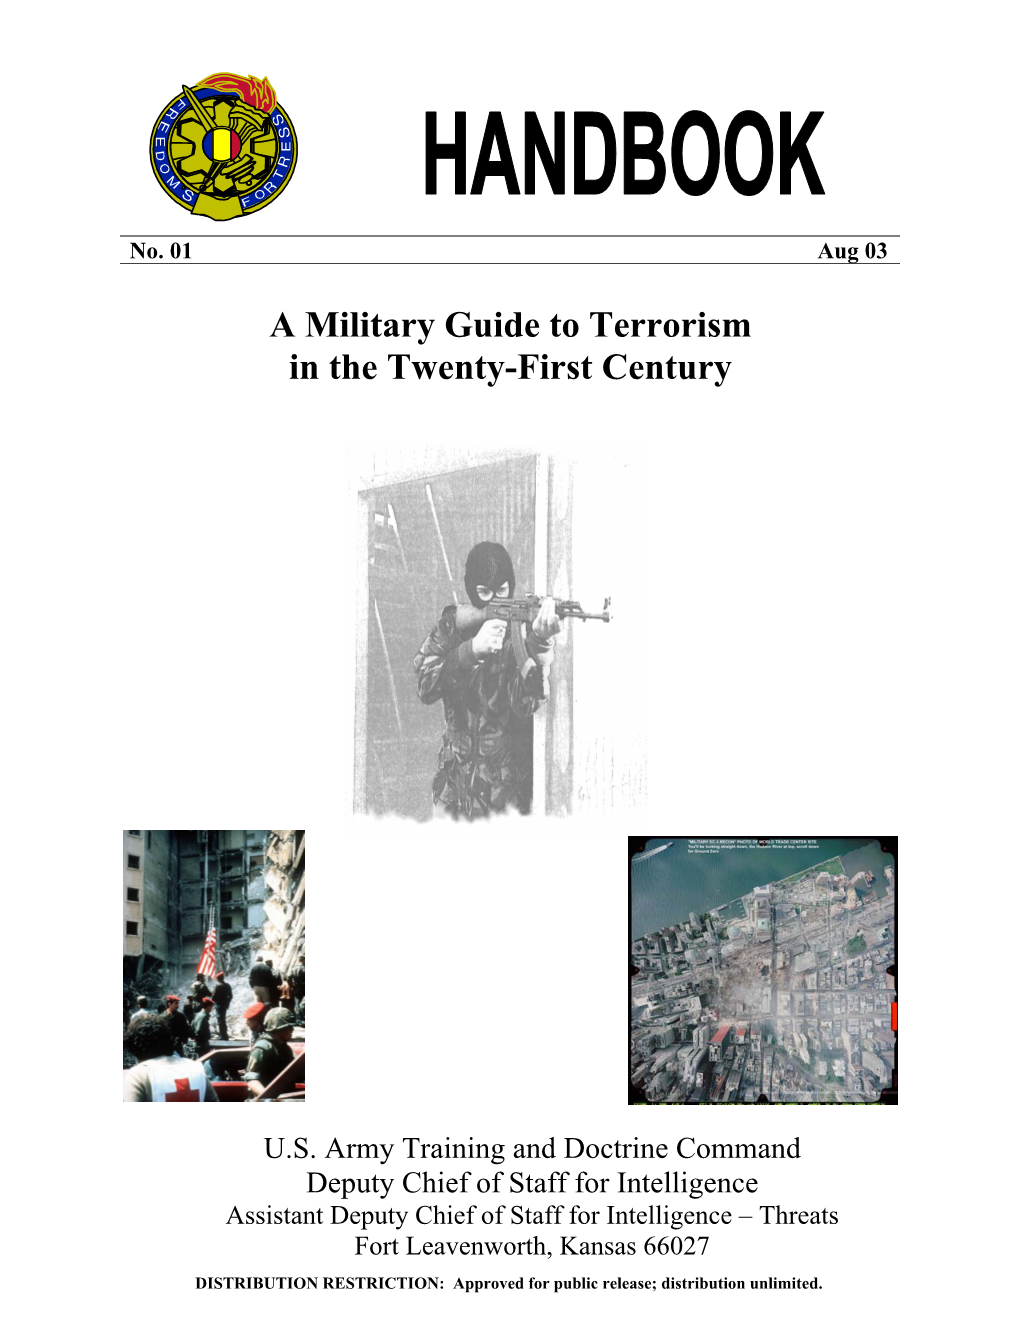 A Military Guide to Terrorism in the 21St Century